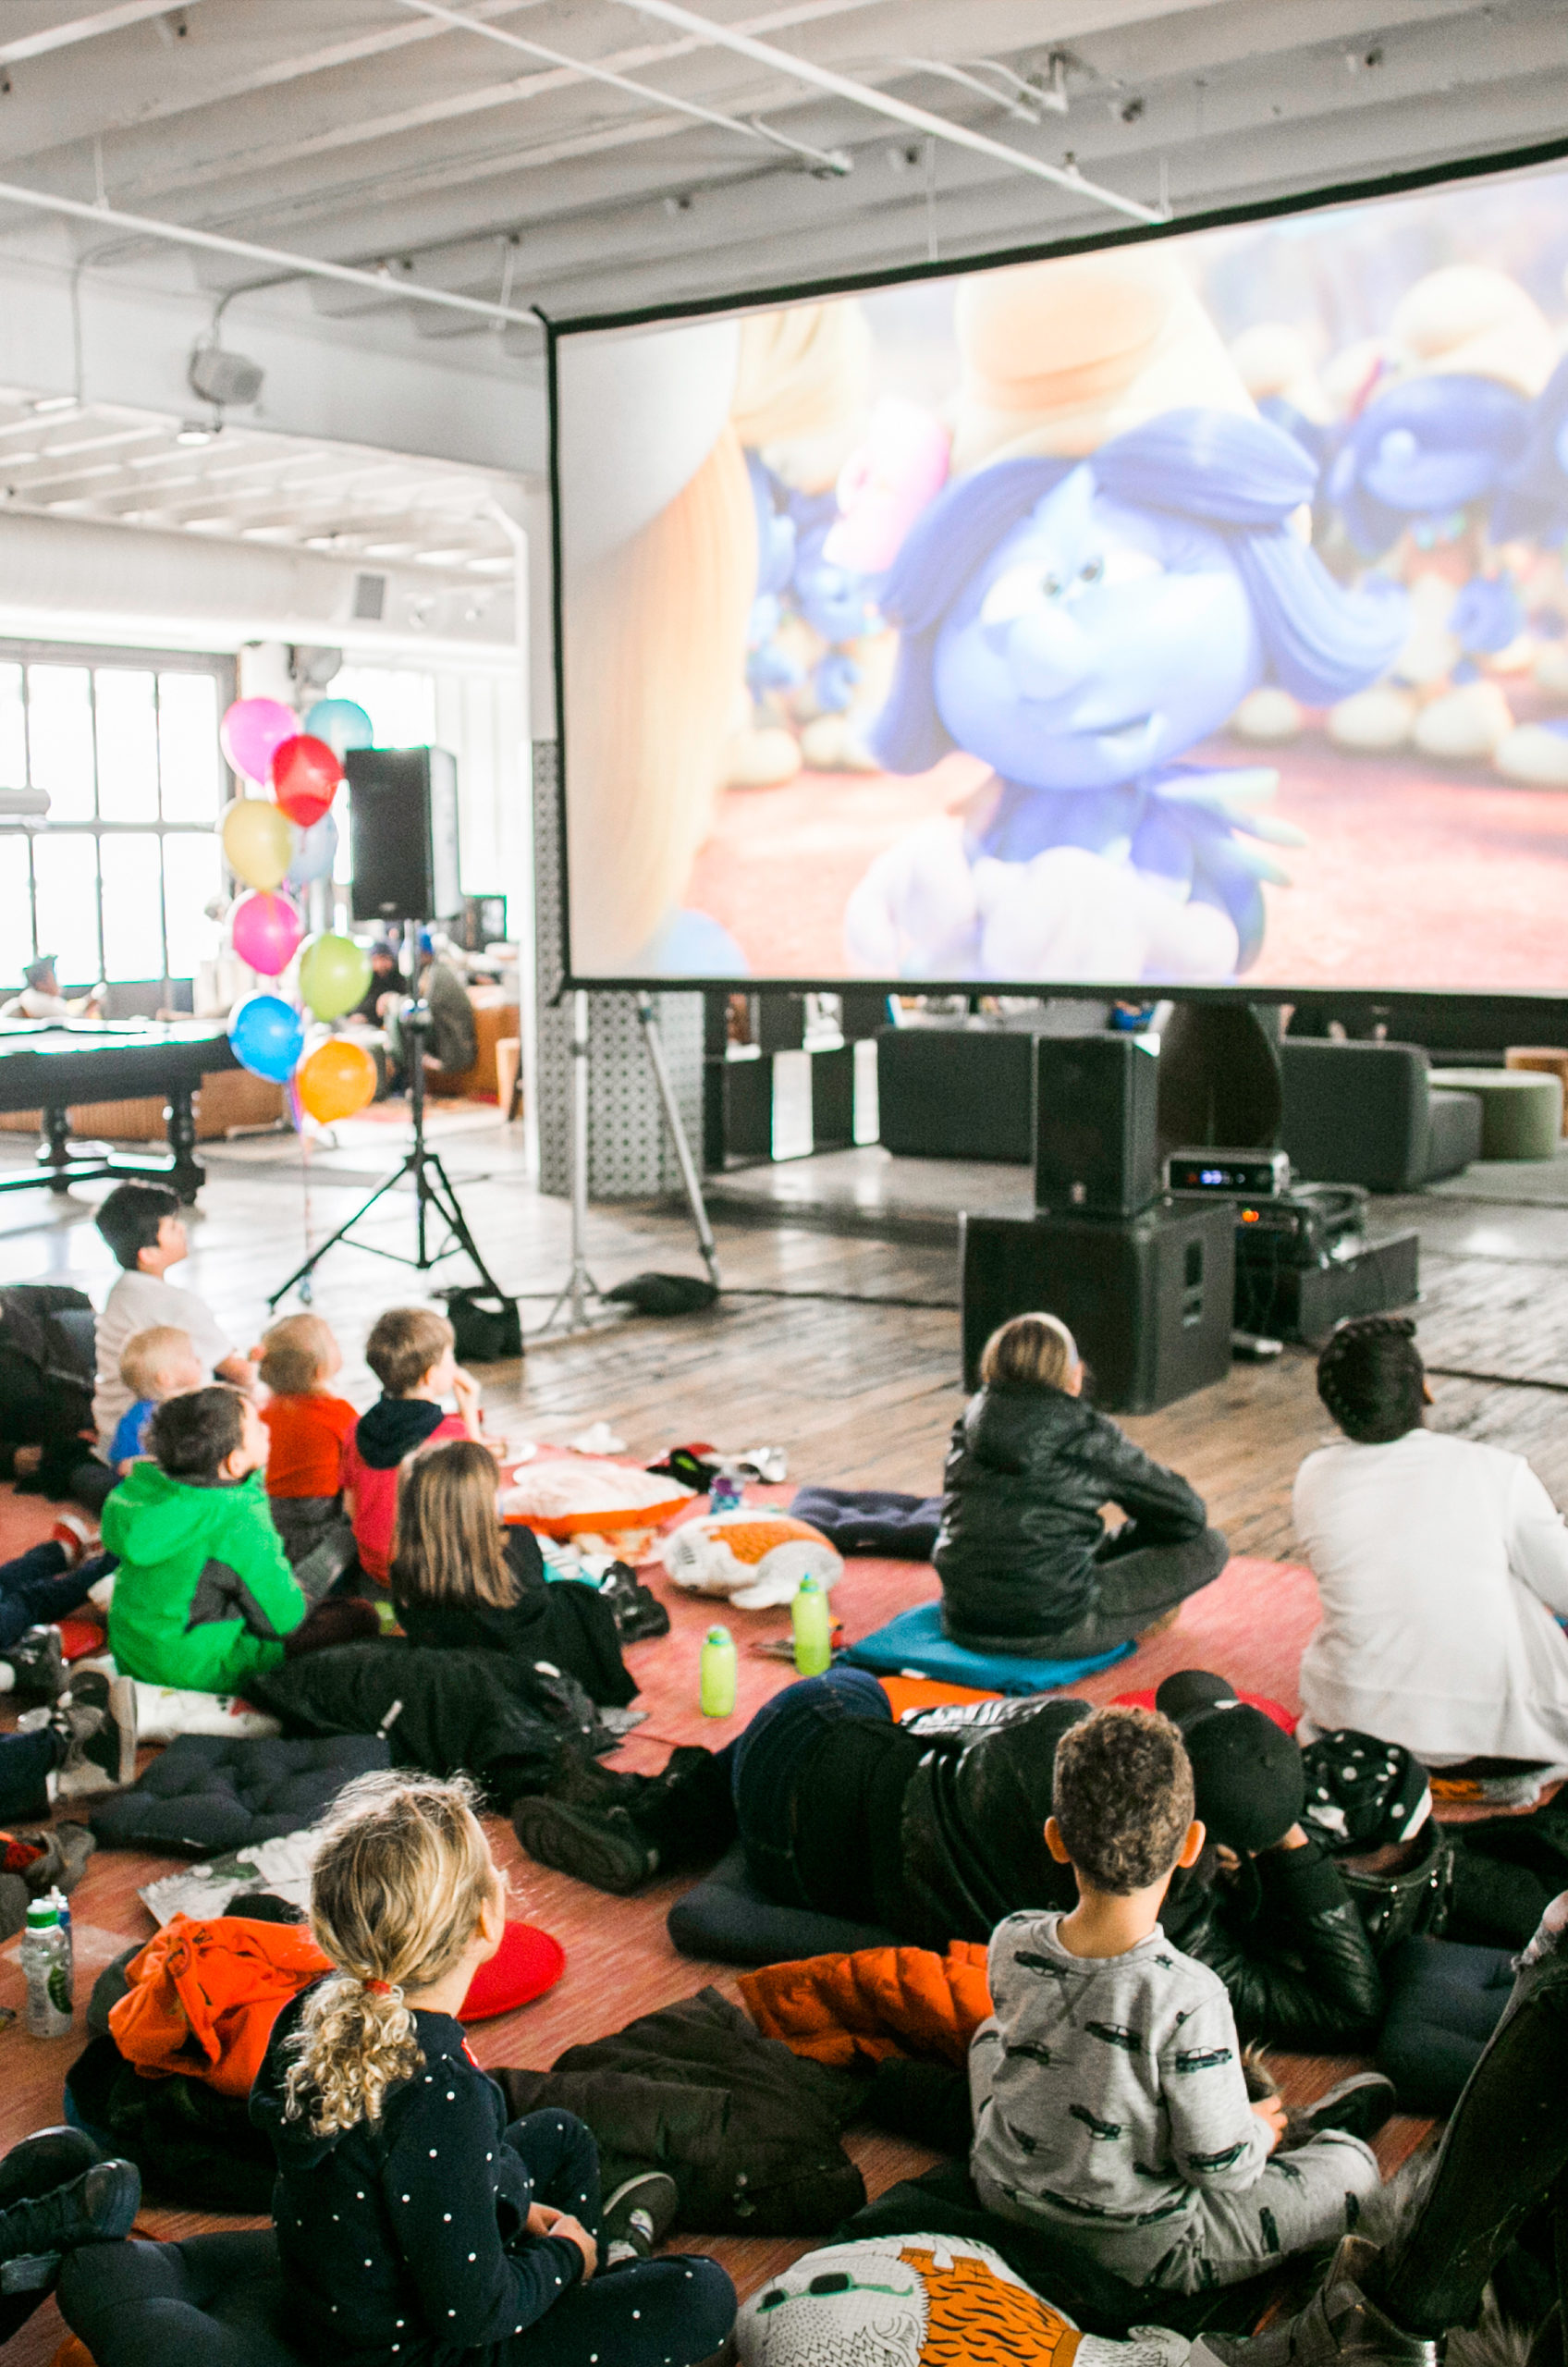 Children are sitting and watching a movie in an event space.